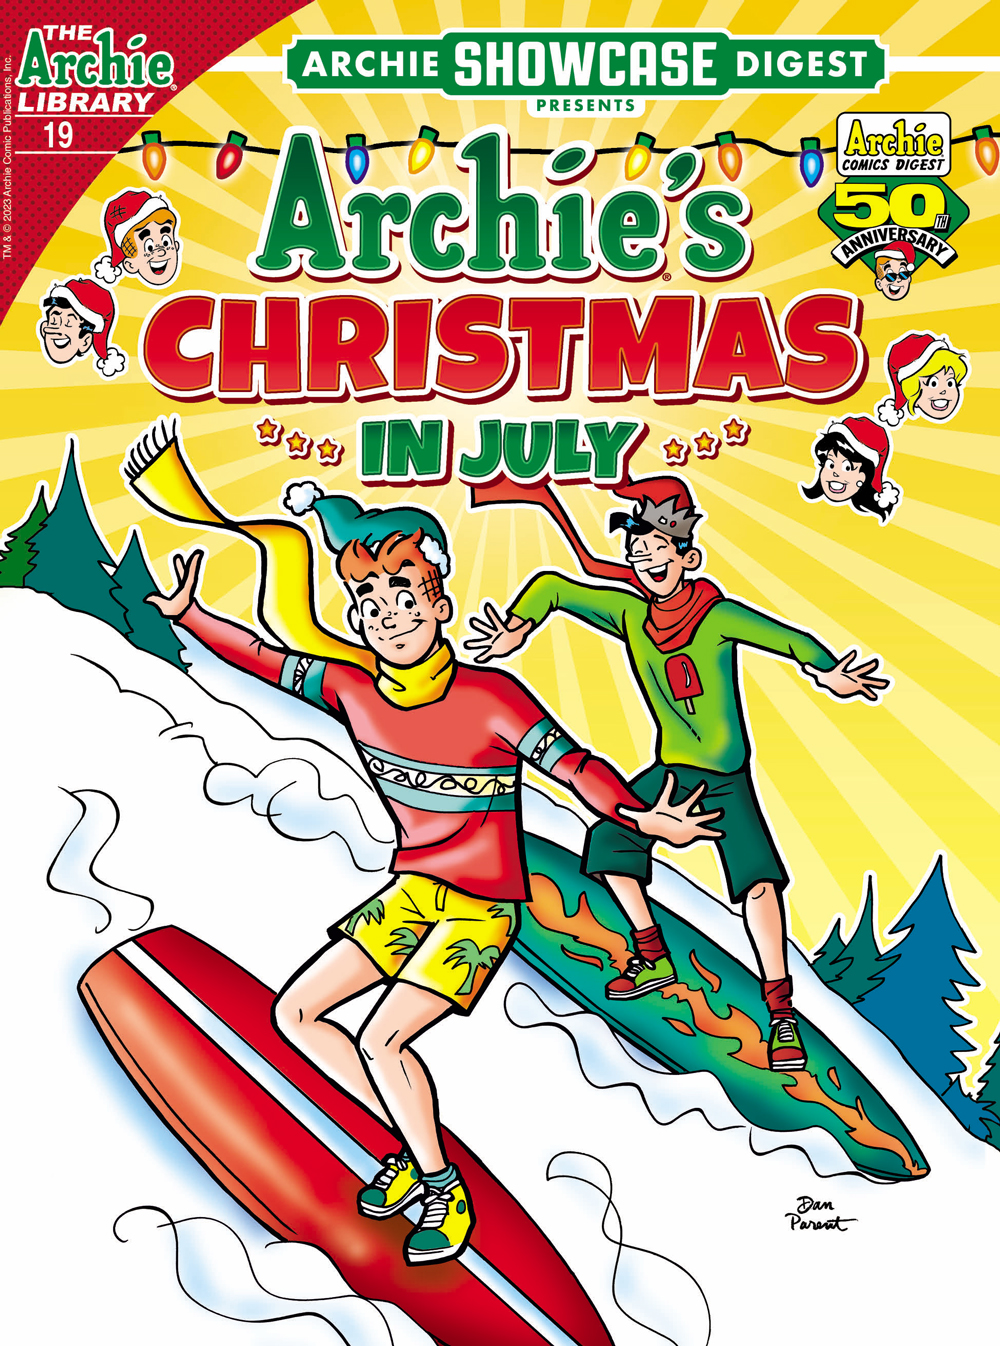 Archie and Jughead are wearing Christmas-themed summer wear, including shorts, Santa hats, and ugly Christmas sweaters. They are snowboarding down a slope, smiling. 